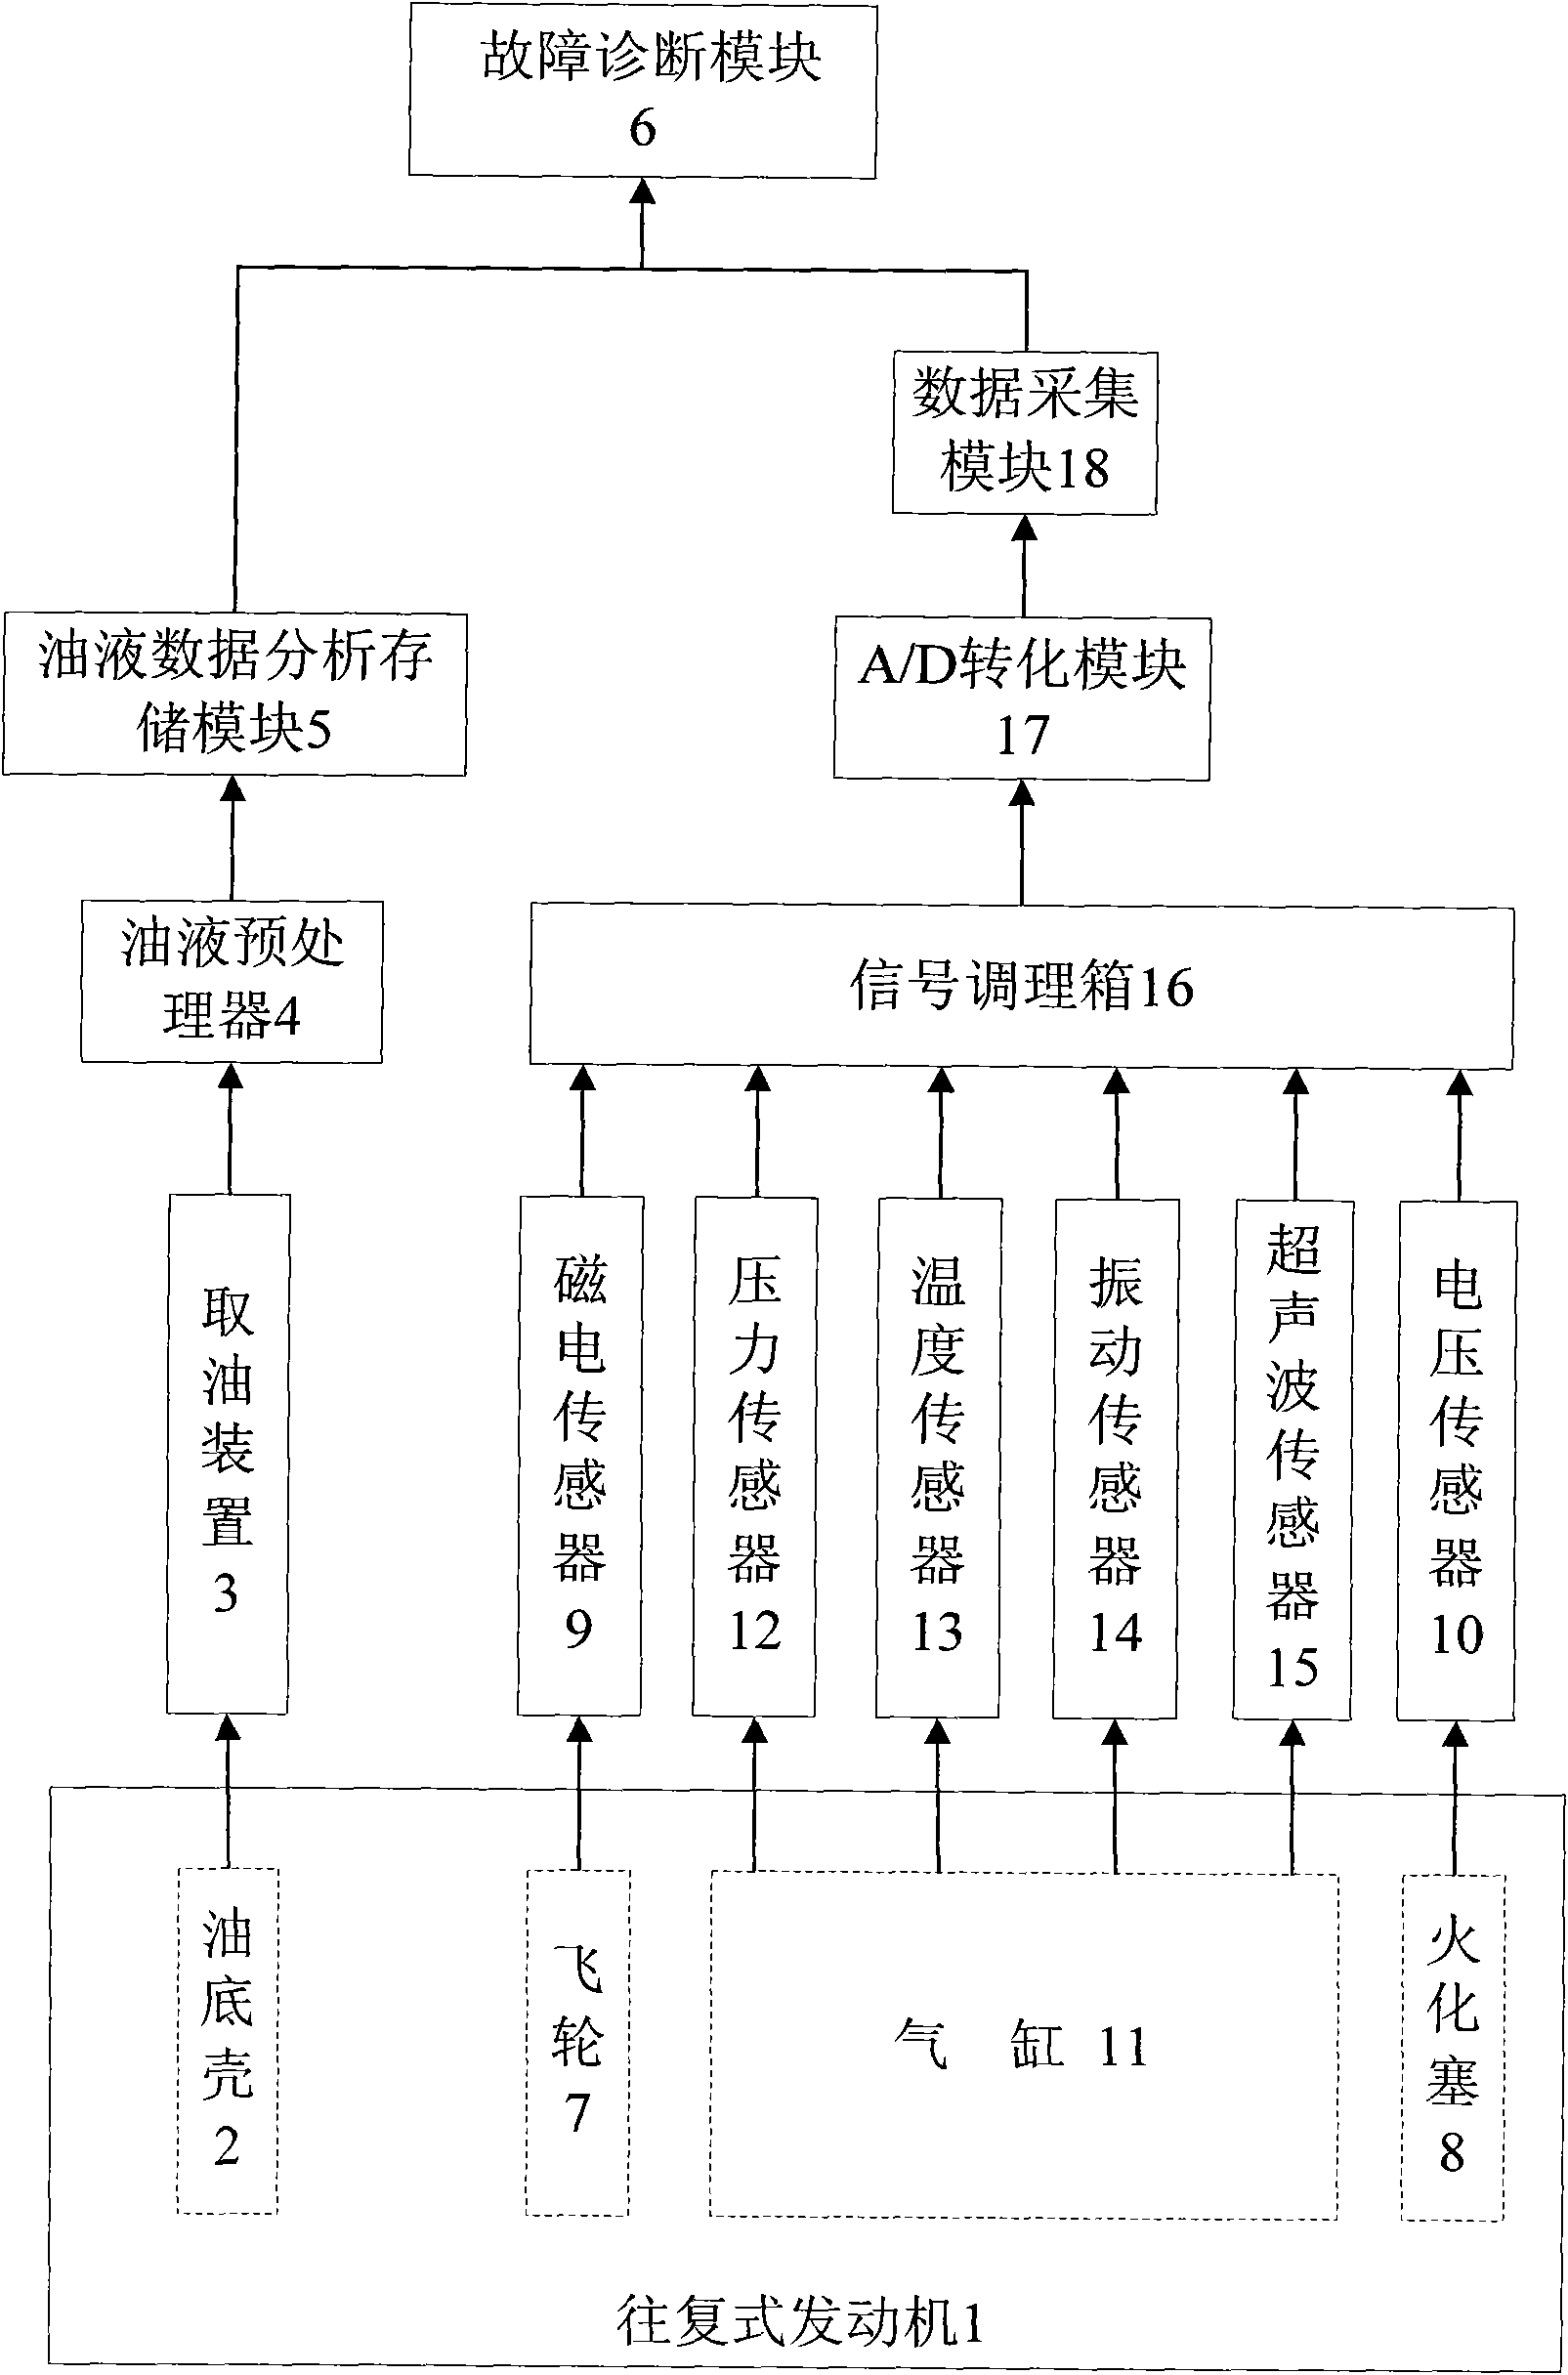 Failure monitoring and predicting method and system of power equipment